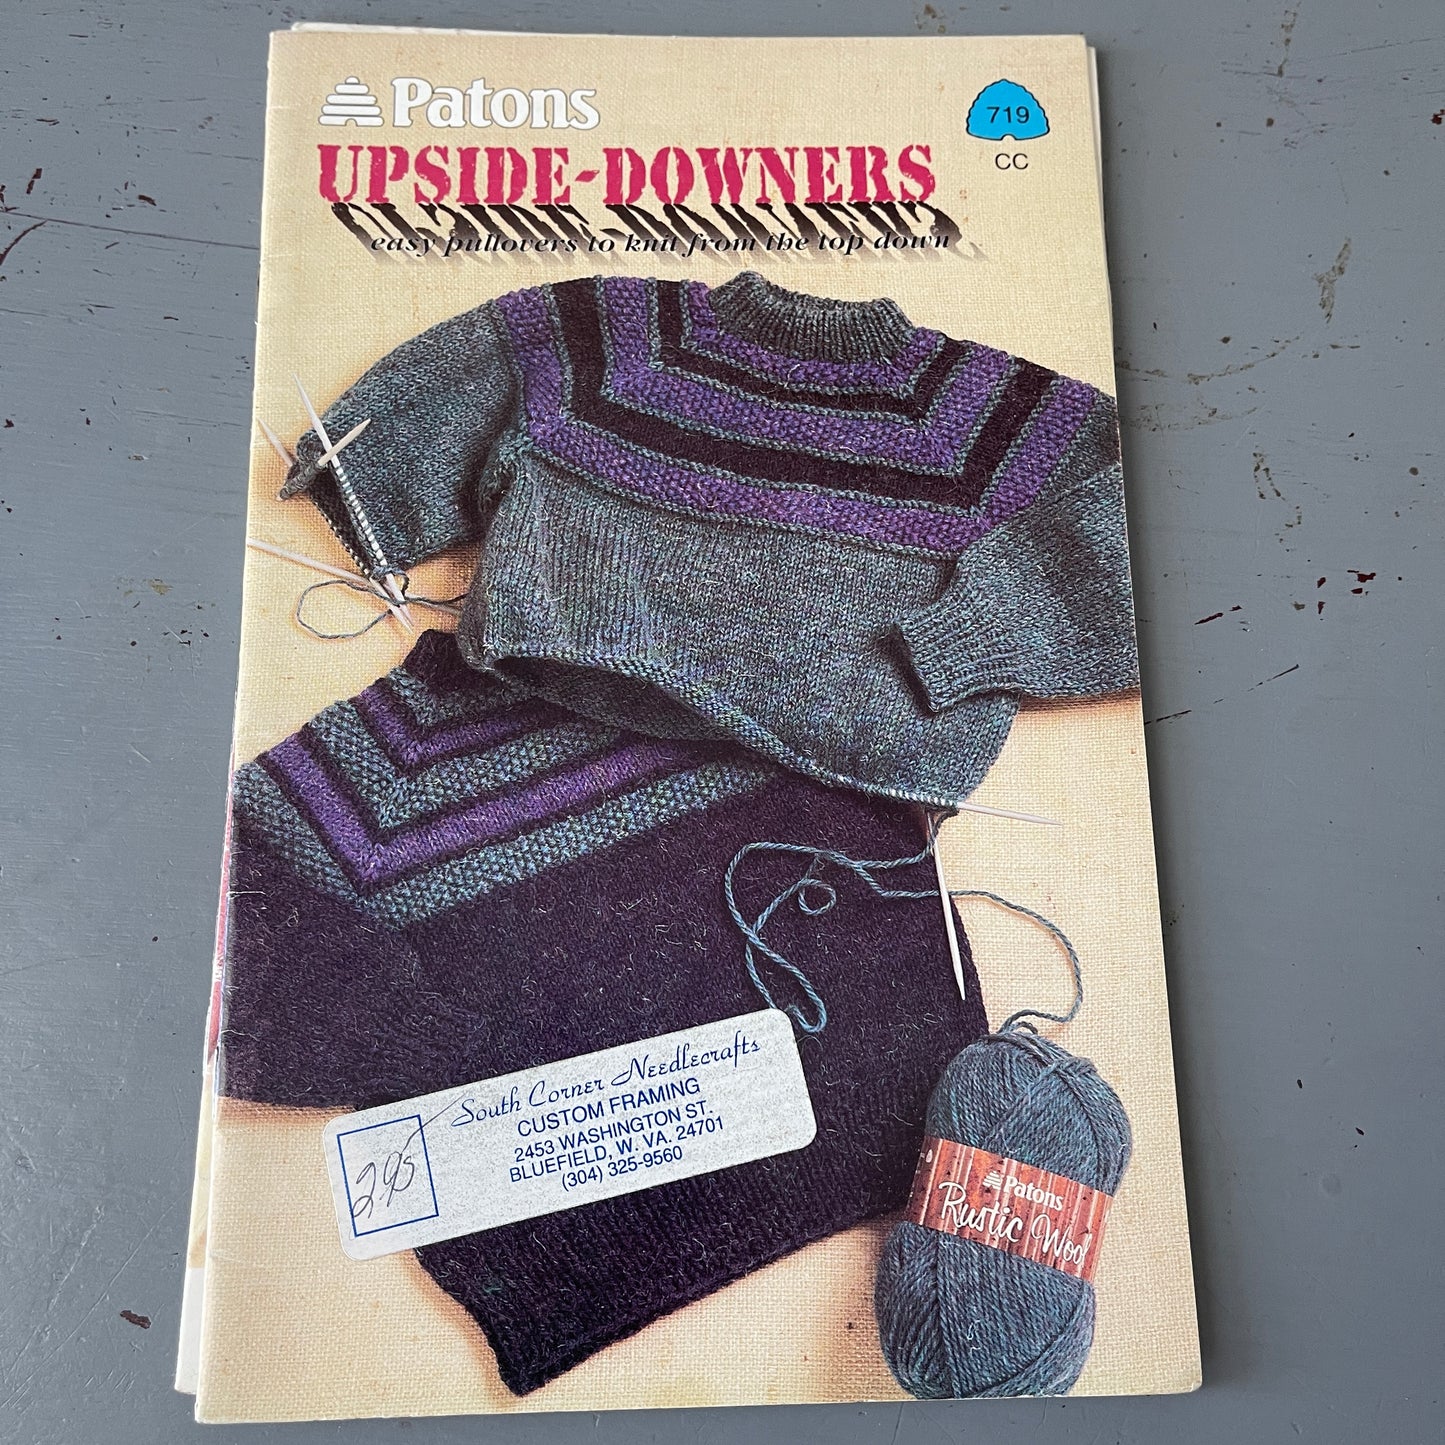 Crochet and Knitting choice vintage booklets see pictures and variations*